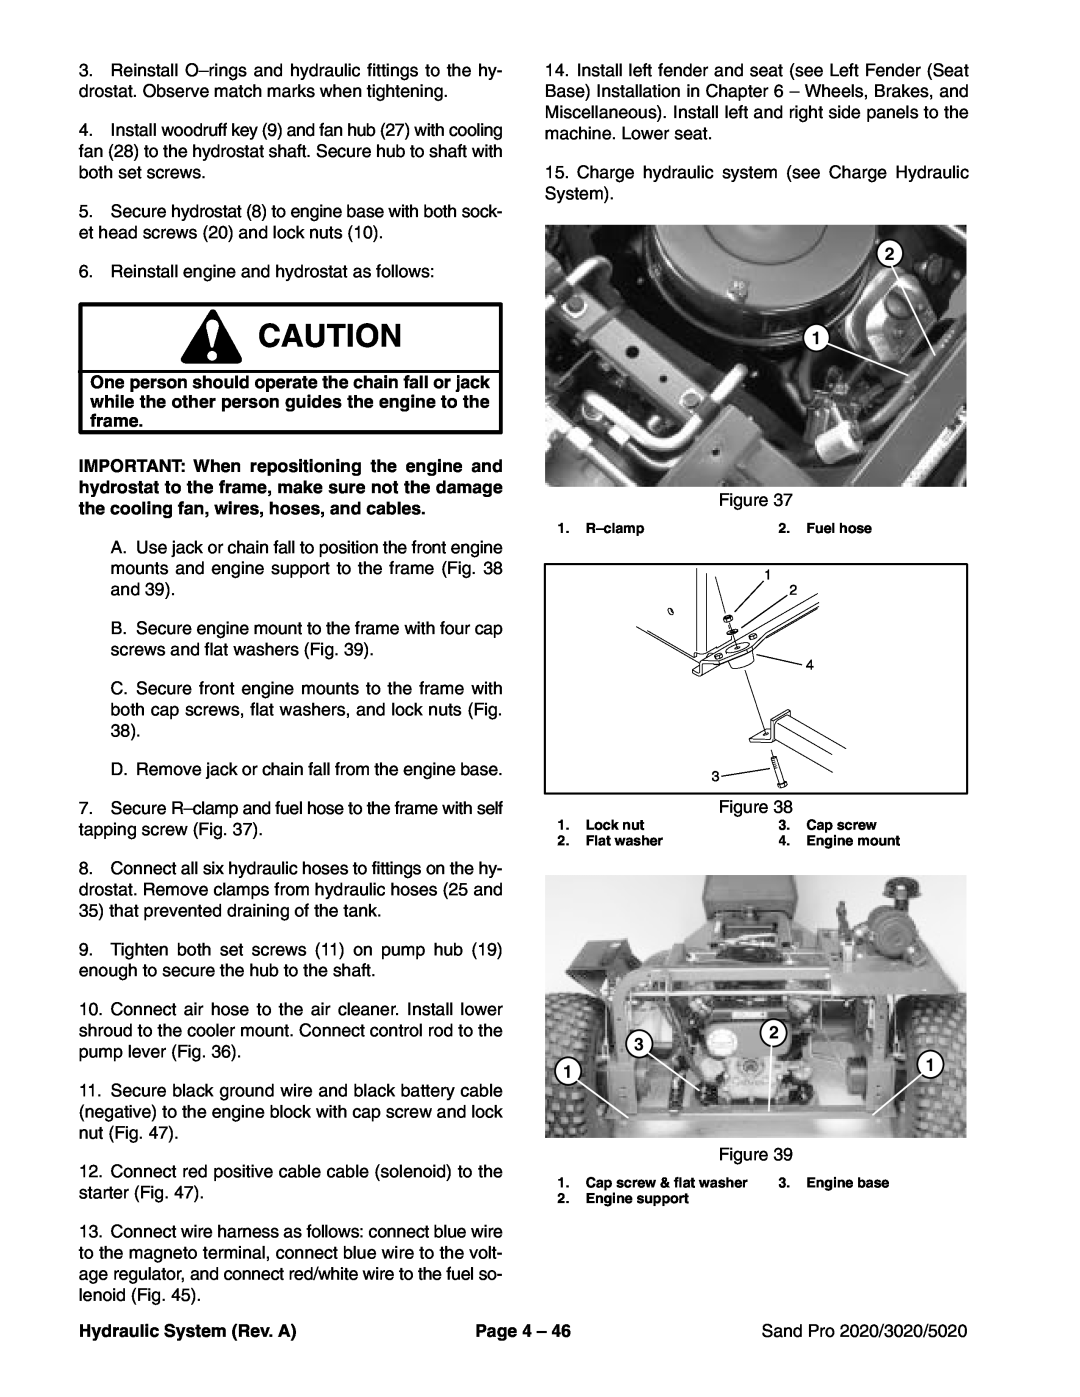 Toro service manual Reinstall engine and hydrostat as follows, Hydraulic System Rev. A, Page 4, Sand Pro 2020/3020/5020 